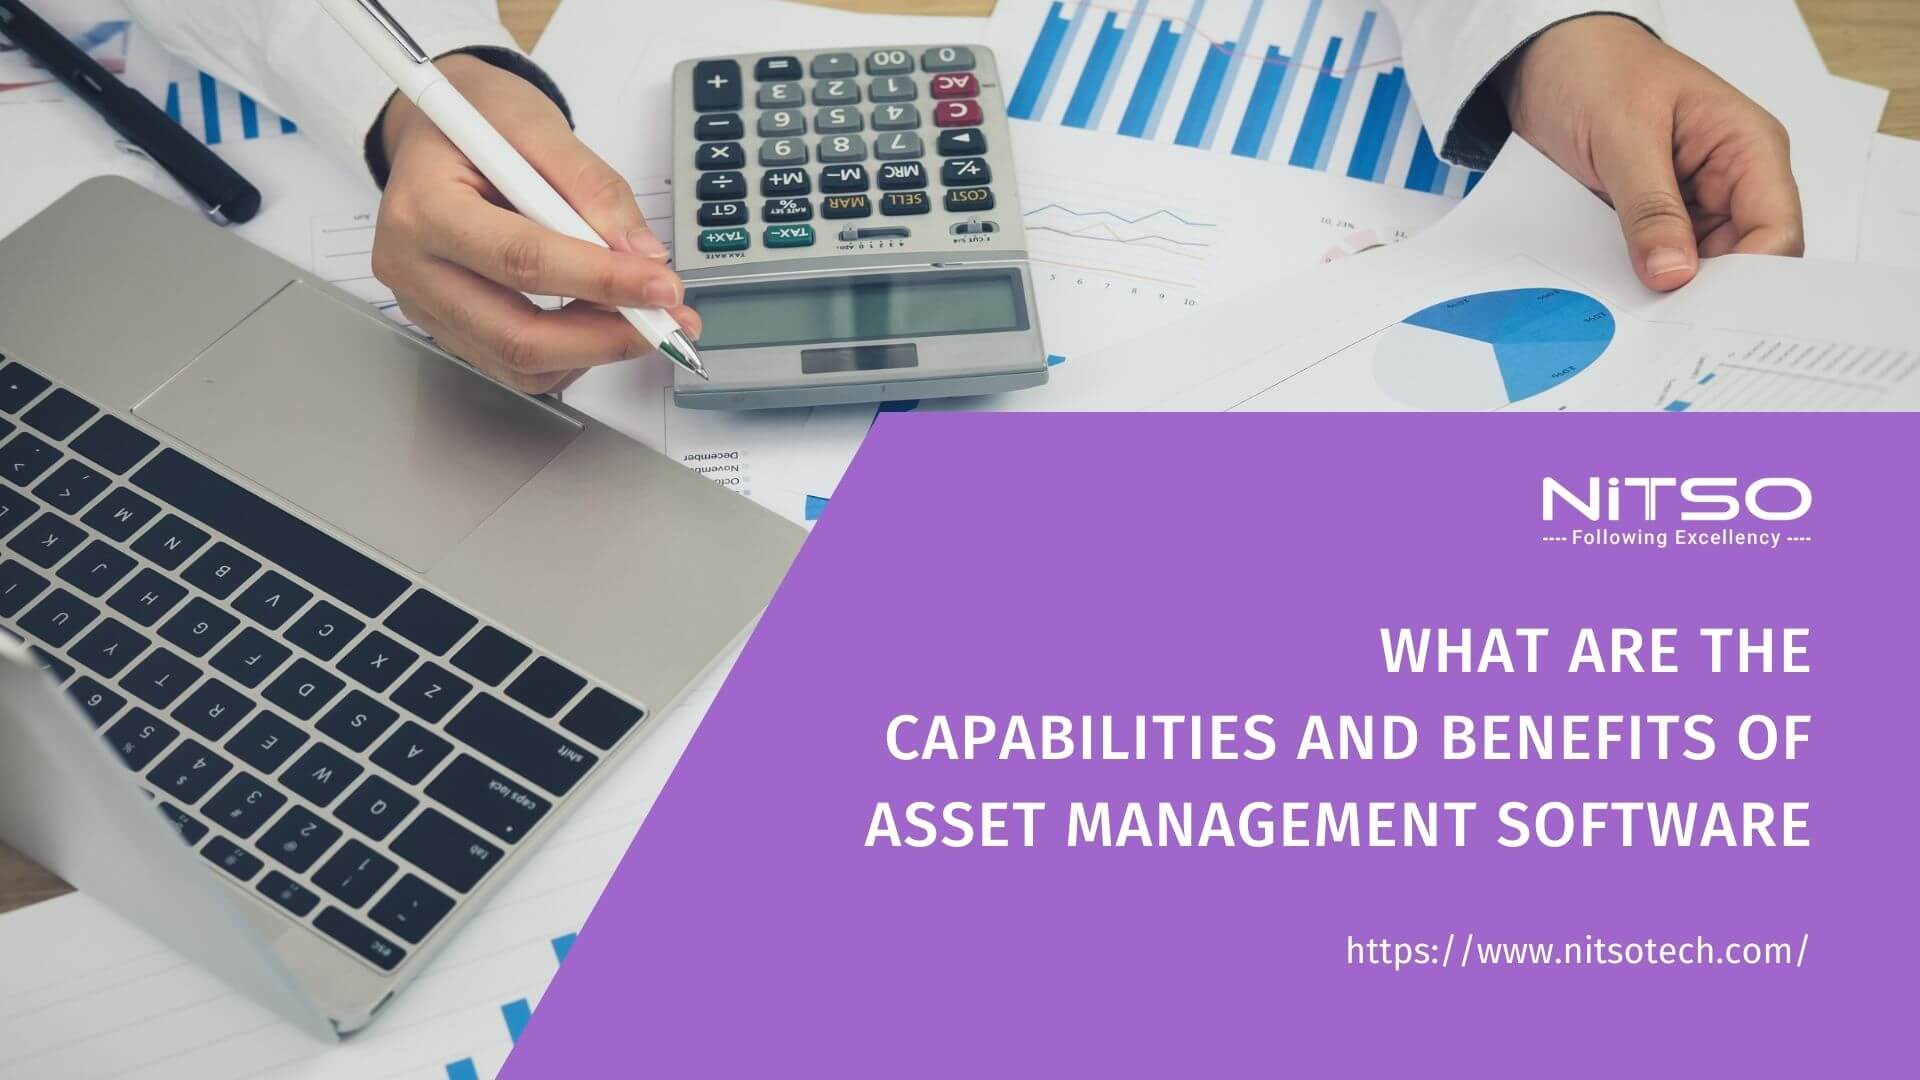 What Does Asset Management Software Do?